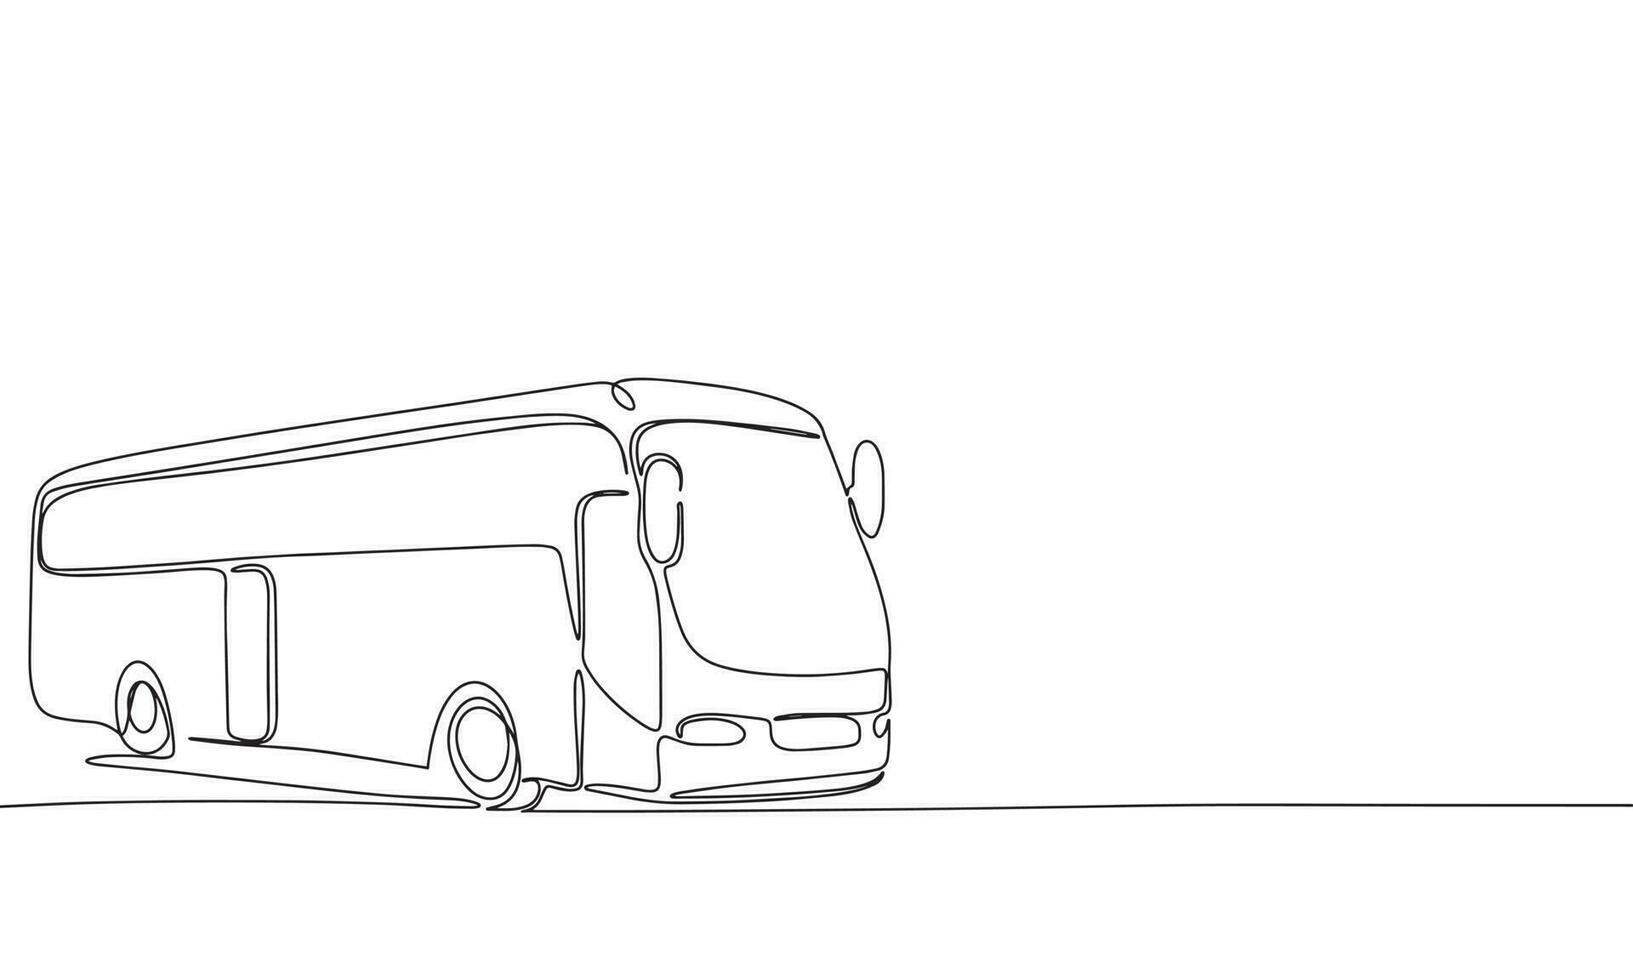 Bus isolated on white background. One line continuous travel concept. Bus outline line art vector illustration.